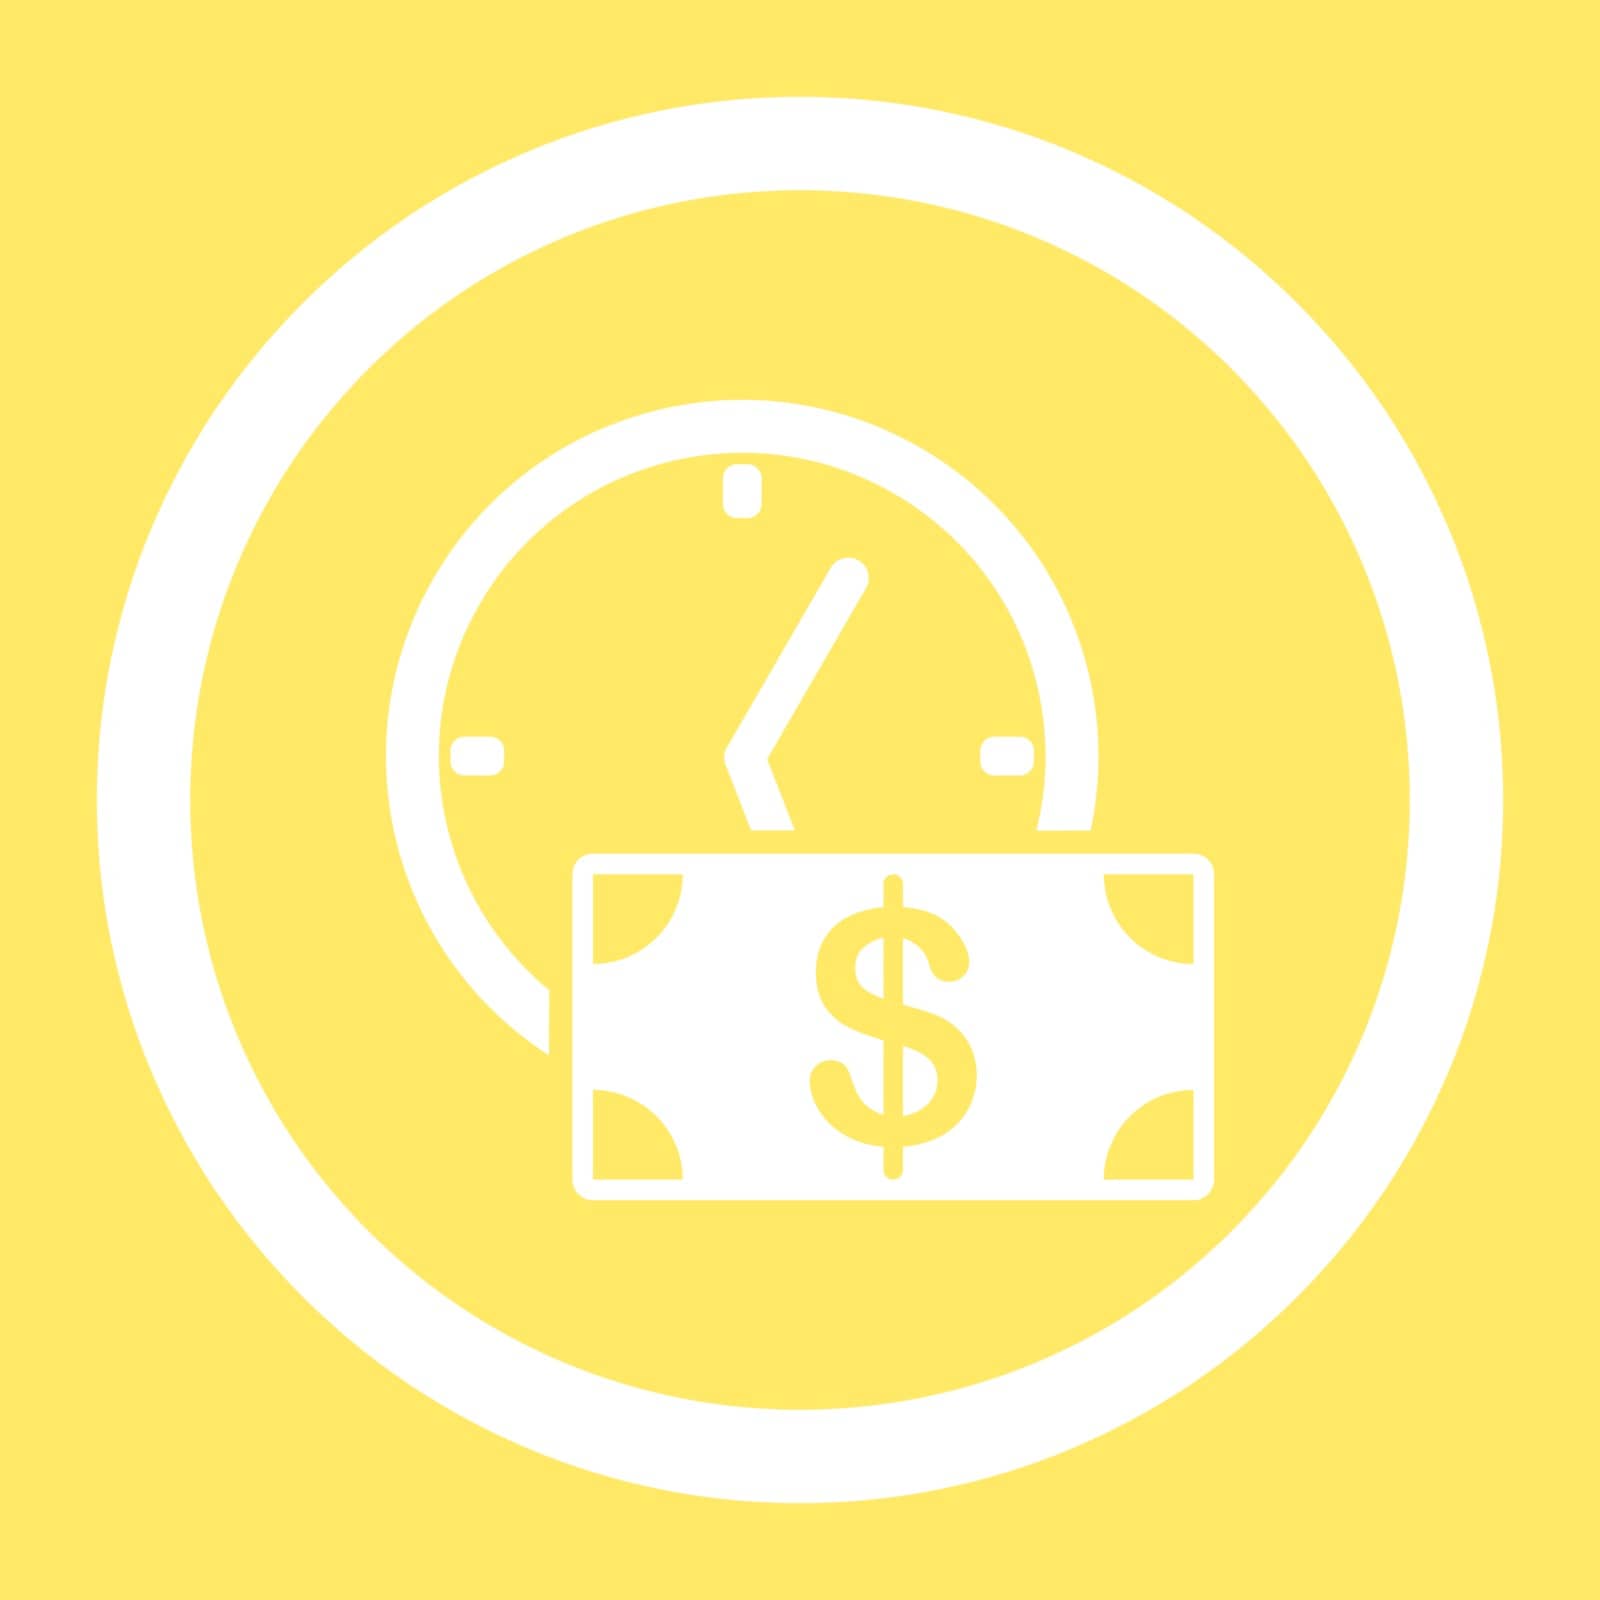 Credit vector icon. This flat rounded symbol uses white color and isolated on a yellow background.